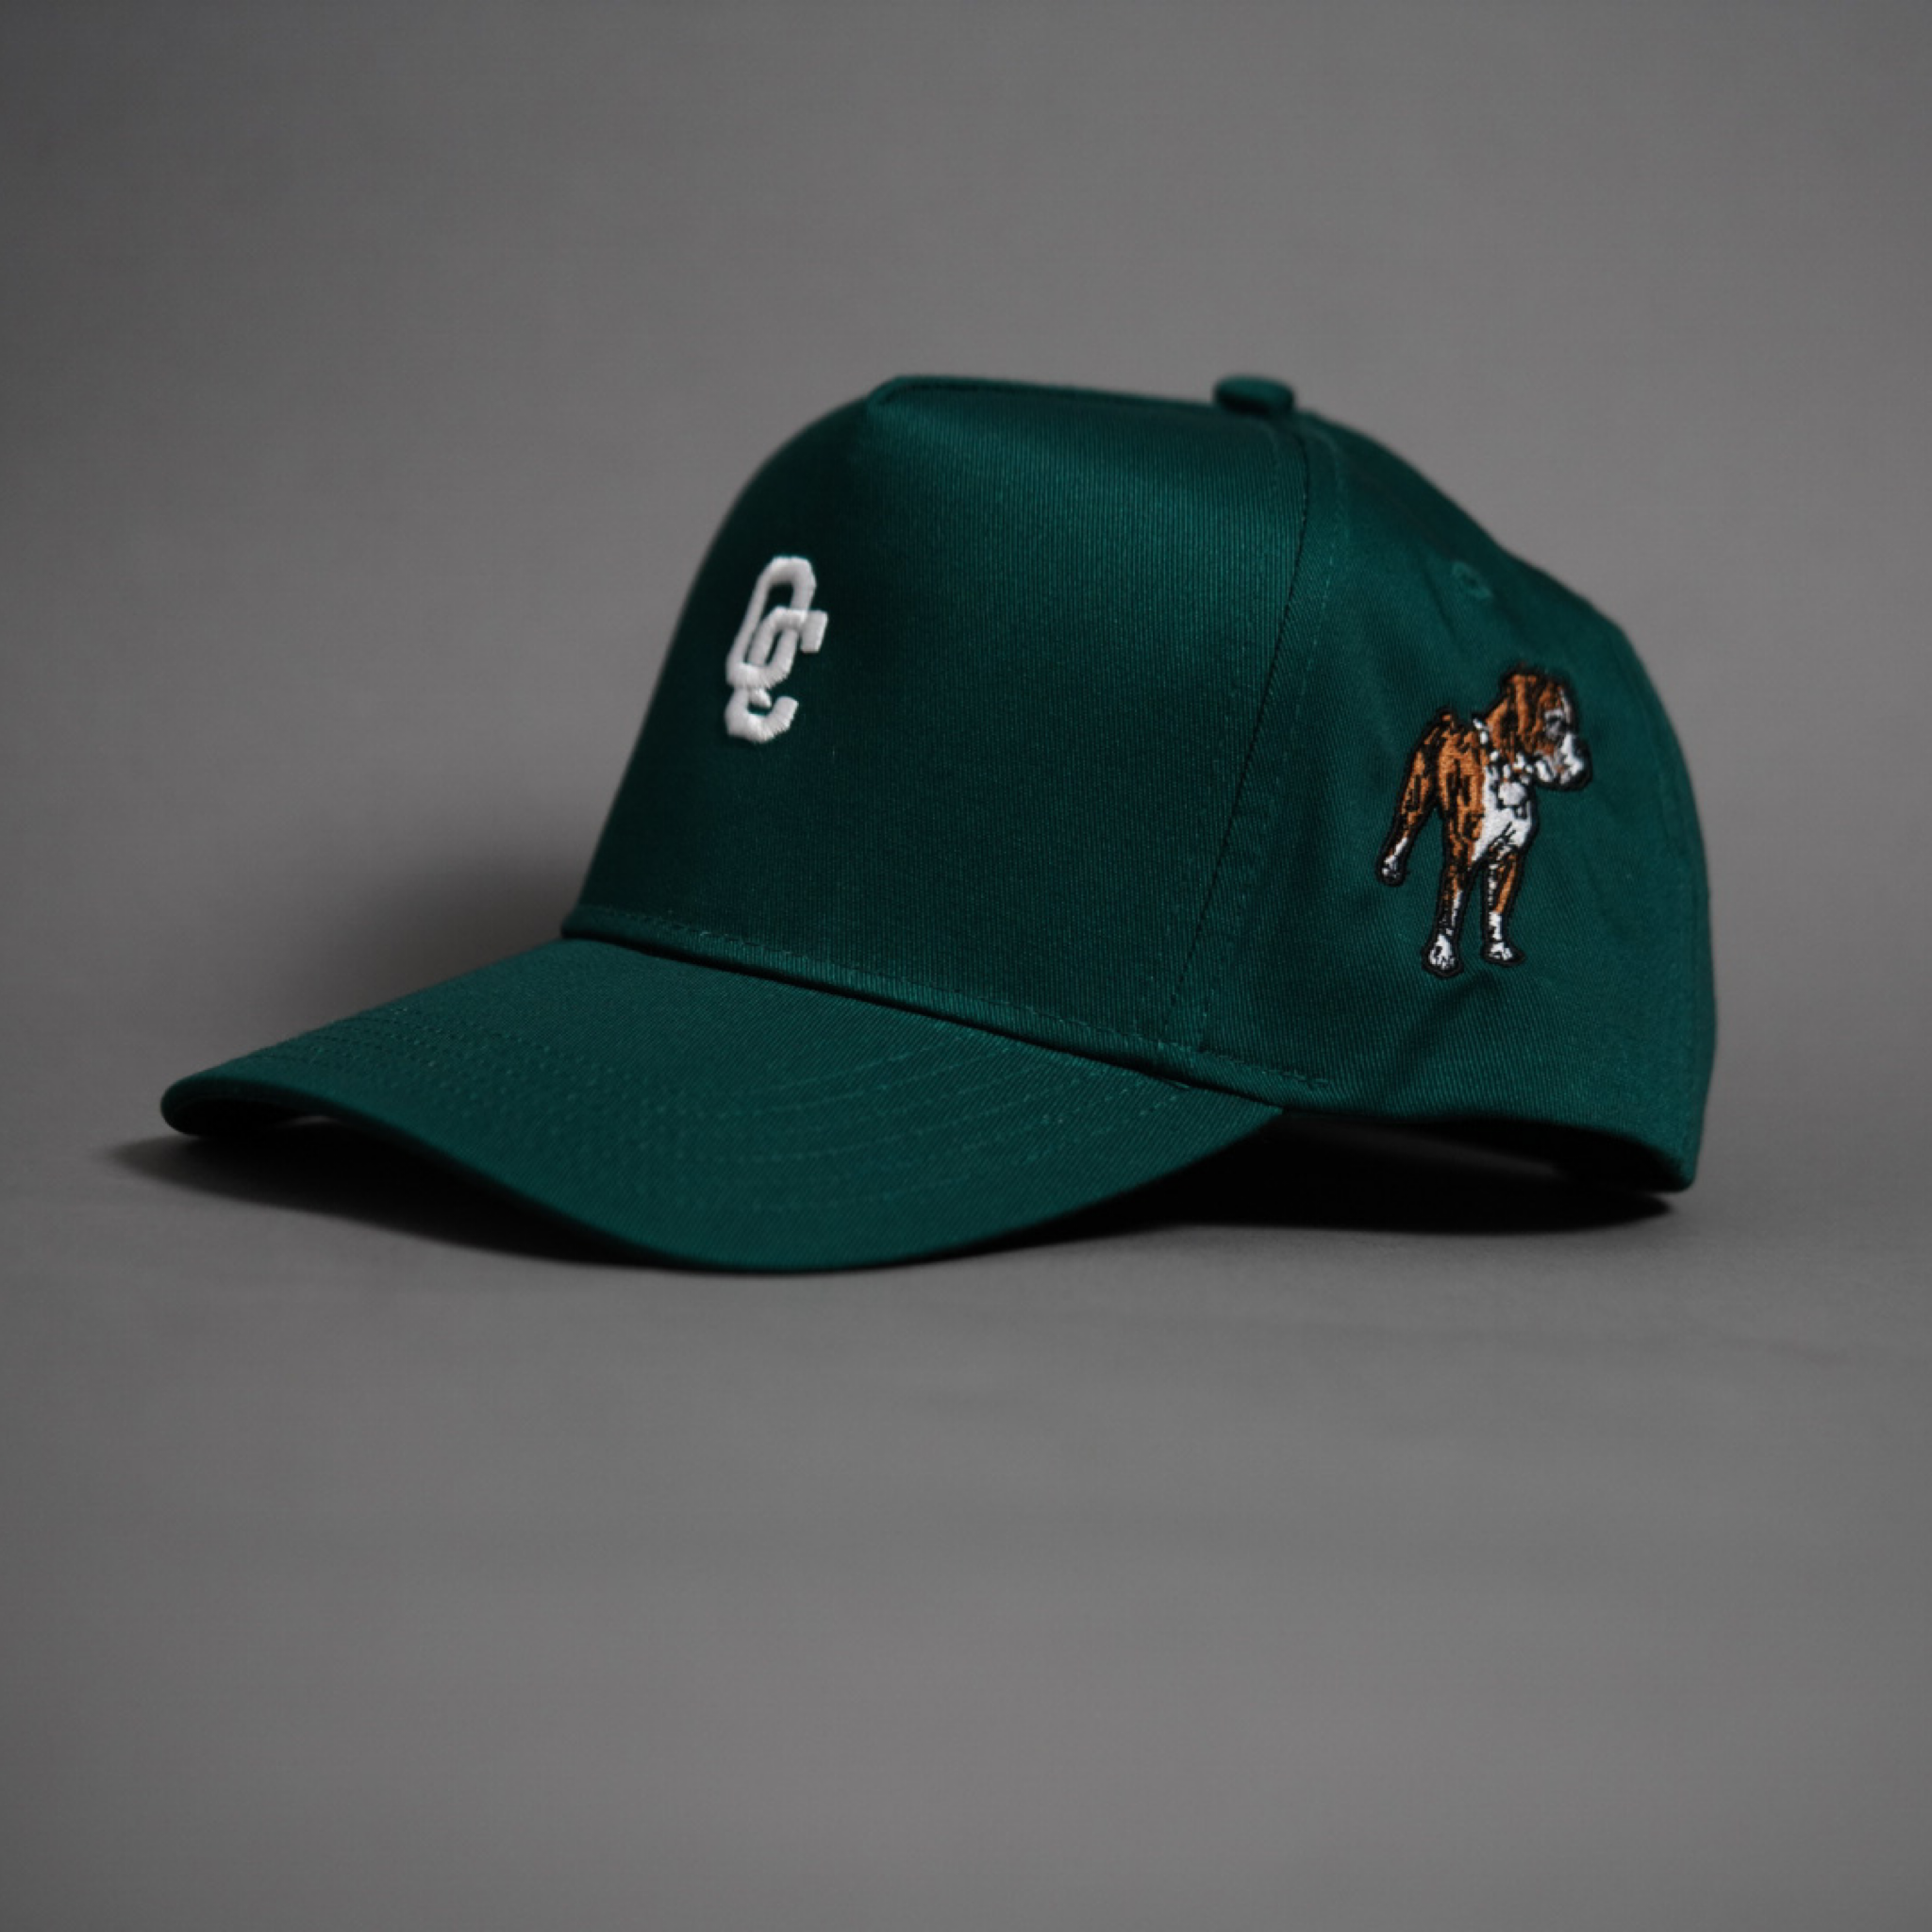 THE BRAVO CAP // FOREST GREEN